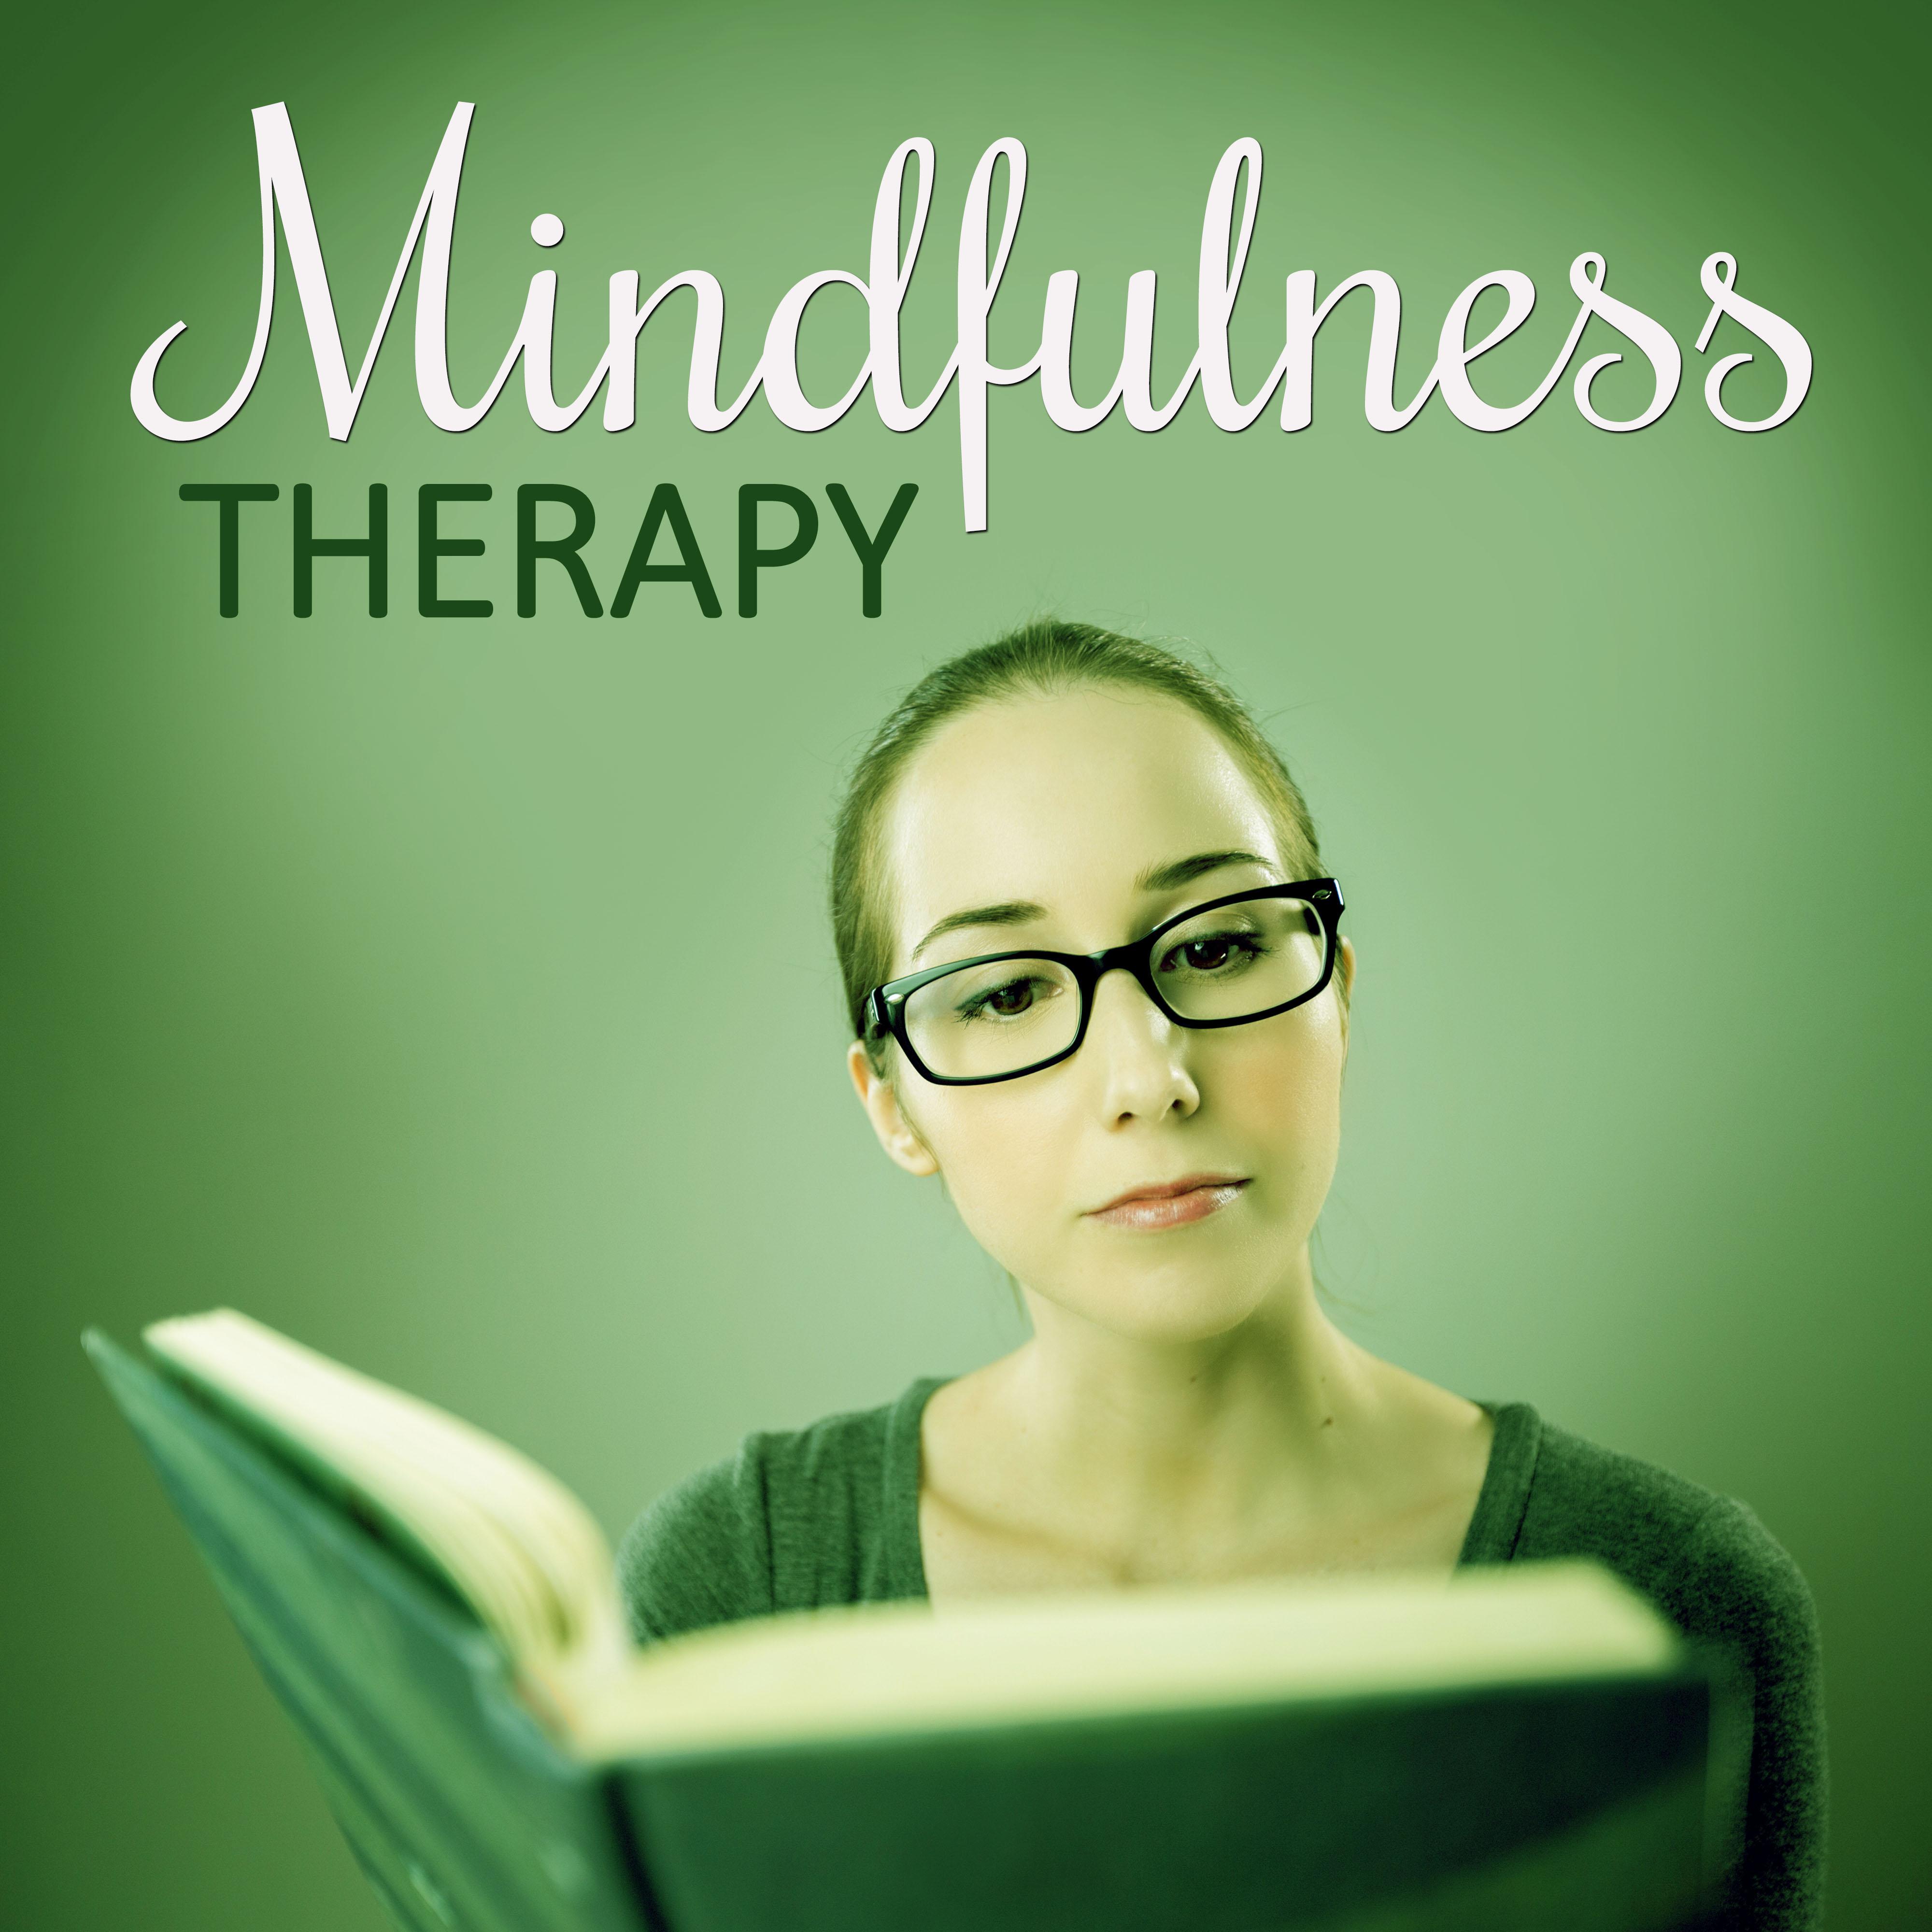 Mindfulness Therapy - New Age Music for Practise Concentration, Mindfulness Meditation and Relax, Harmony Life